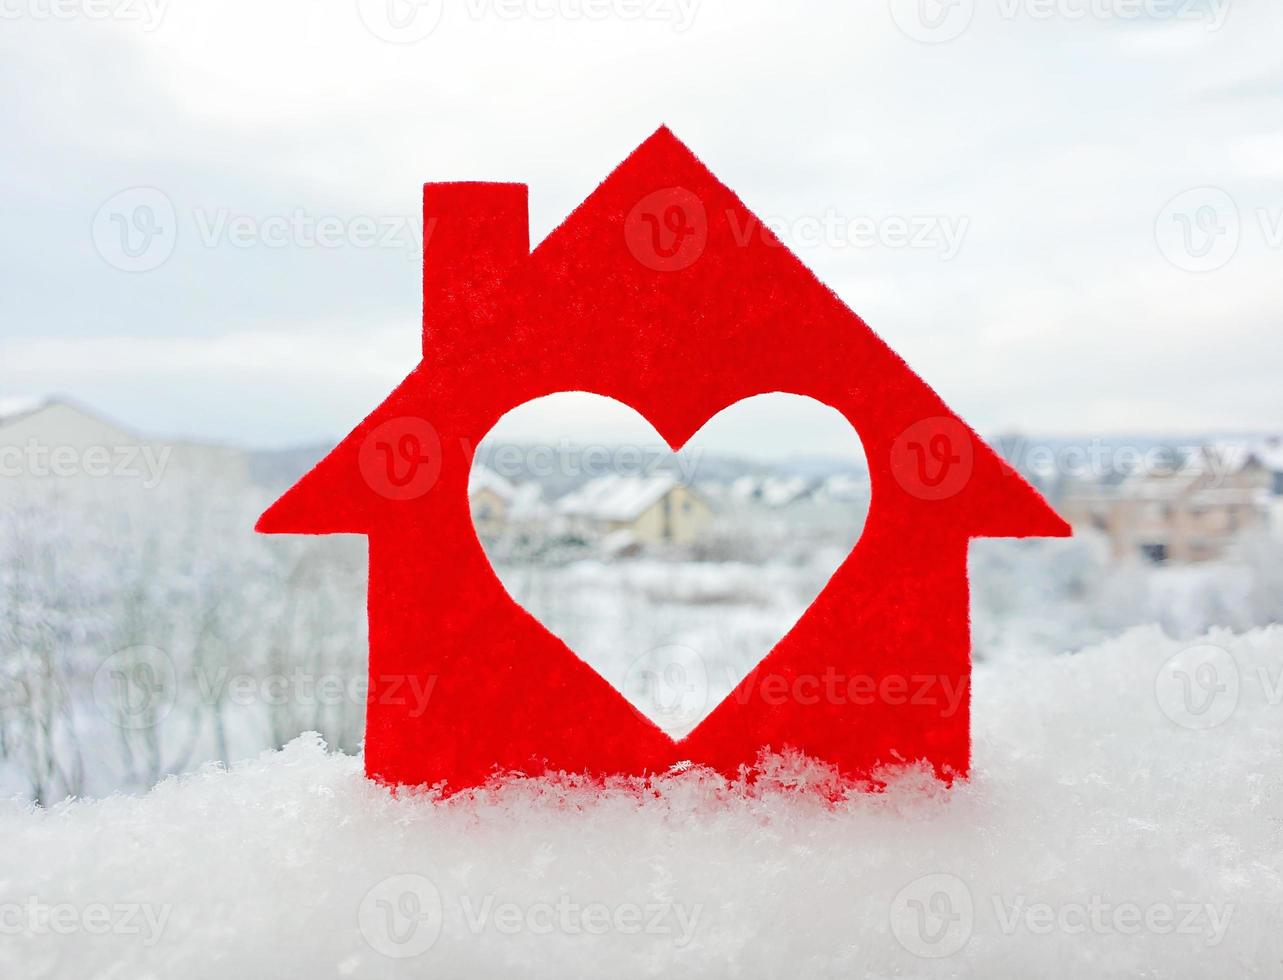 Small house cut out of red felt is standing in the snow. Heart-shaped hole is cut instead of a window. Blurred background of cottage village in winter. Valentine's day concept. photo